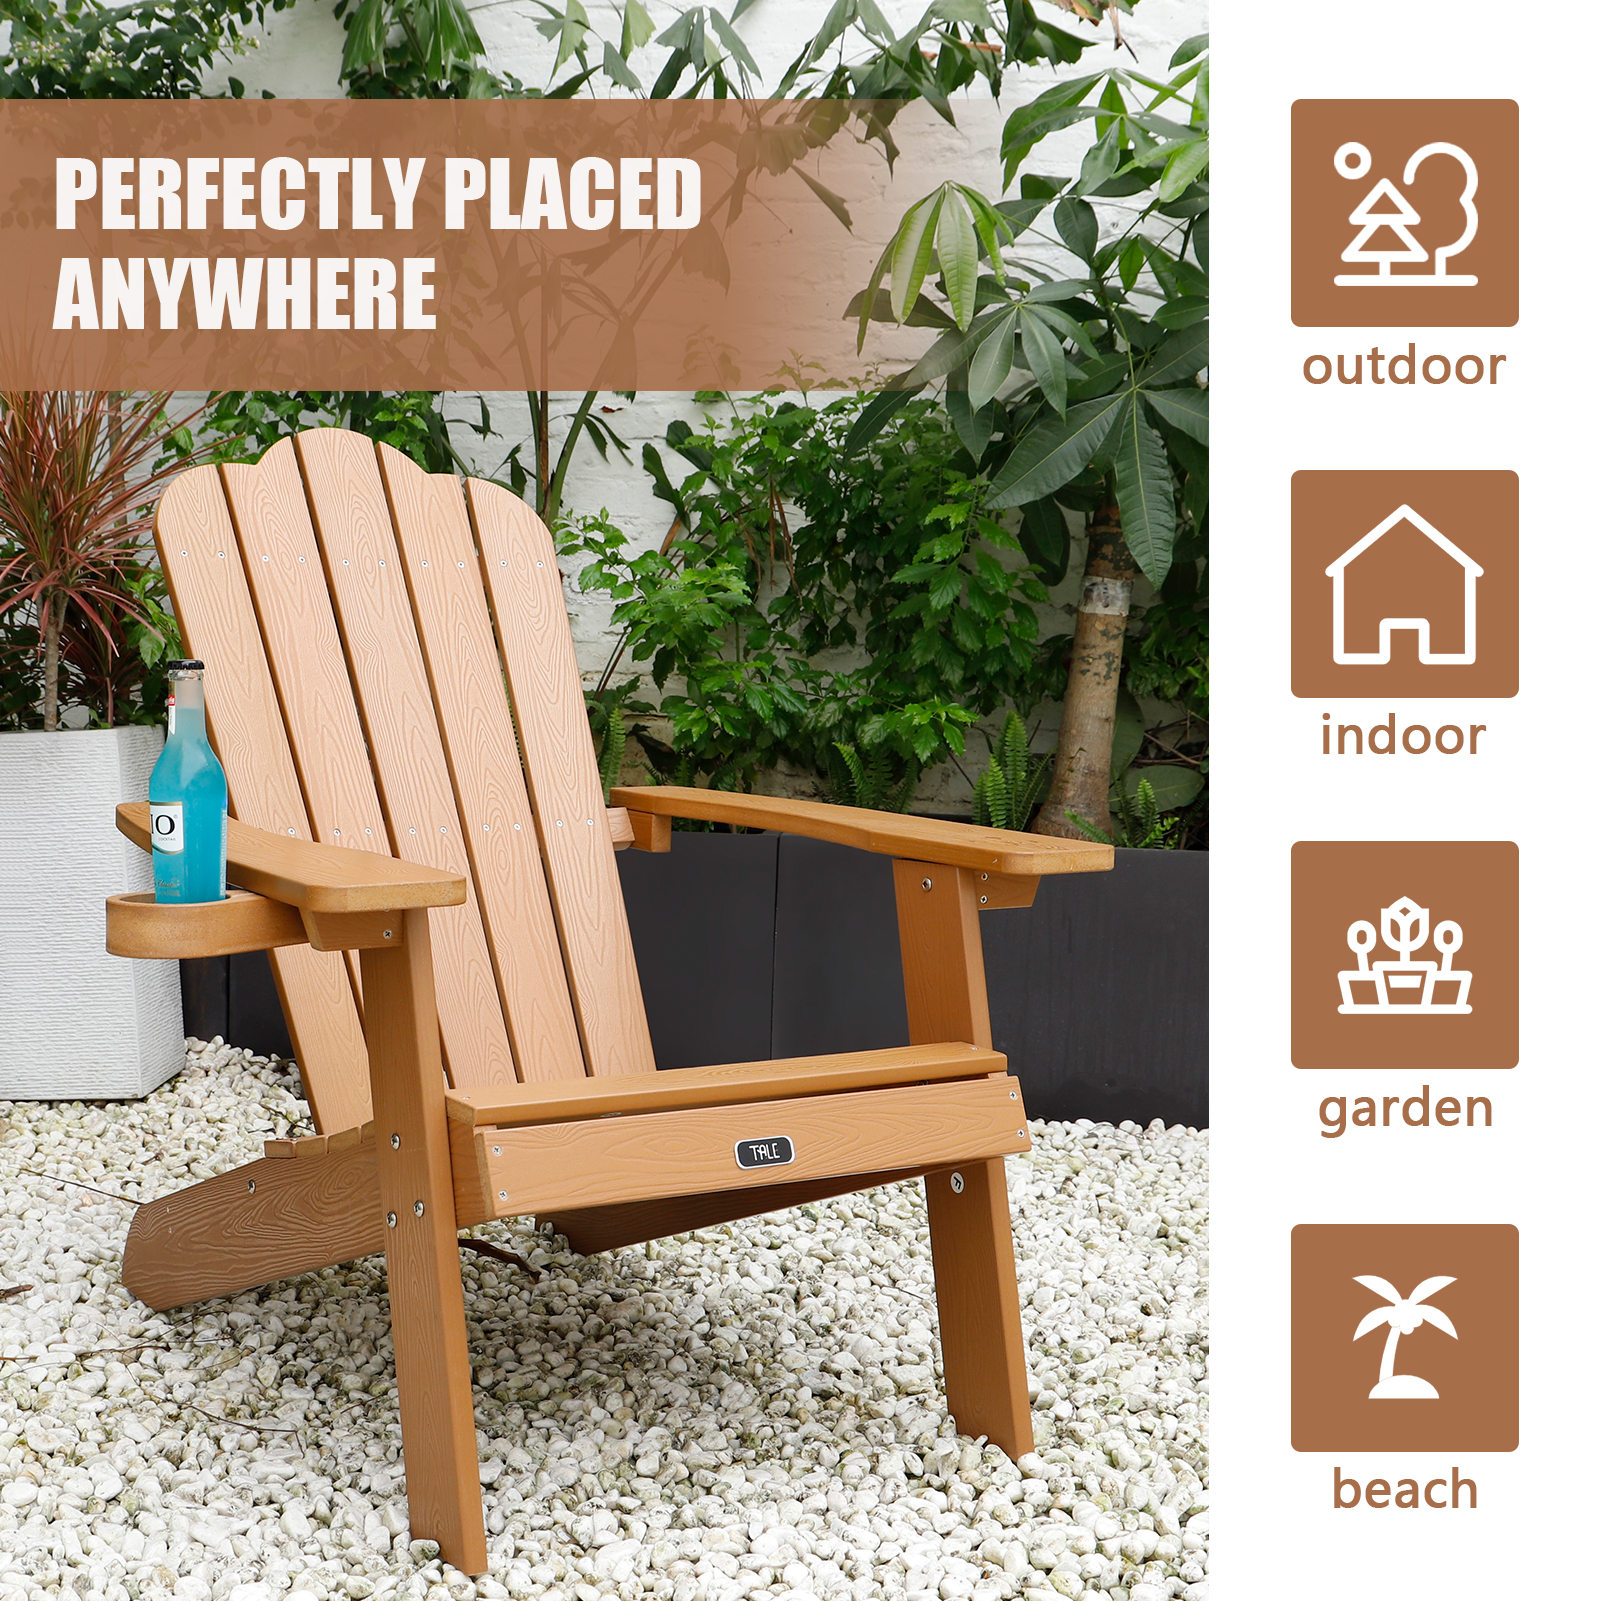 CoSoTower Adirondack Chair Backyard Outdoor Furniture Painted Seating with Cup Holder All-Weather and Fade-Resistant Plastic Wood for Lawn Patio Deck Garden Porch Lawn Furniture Chairs Brown - image 2 of 7